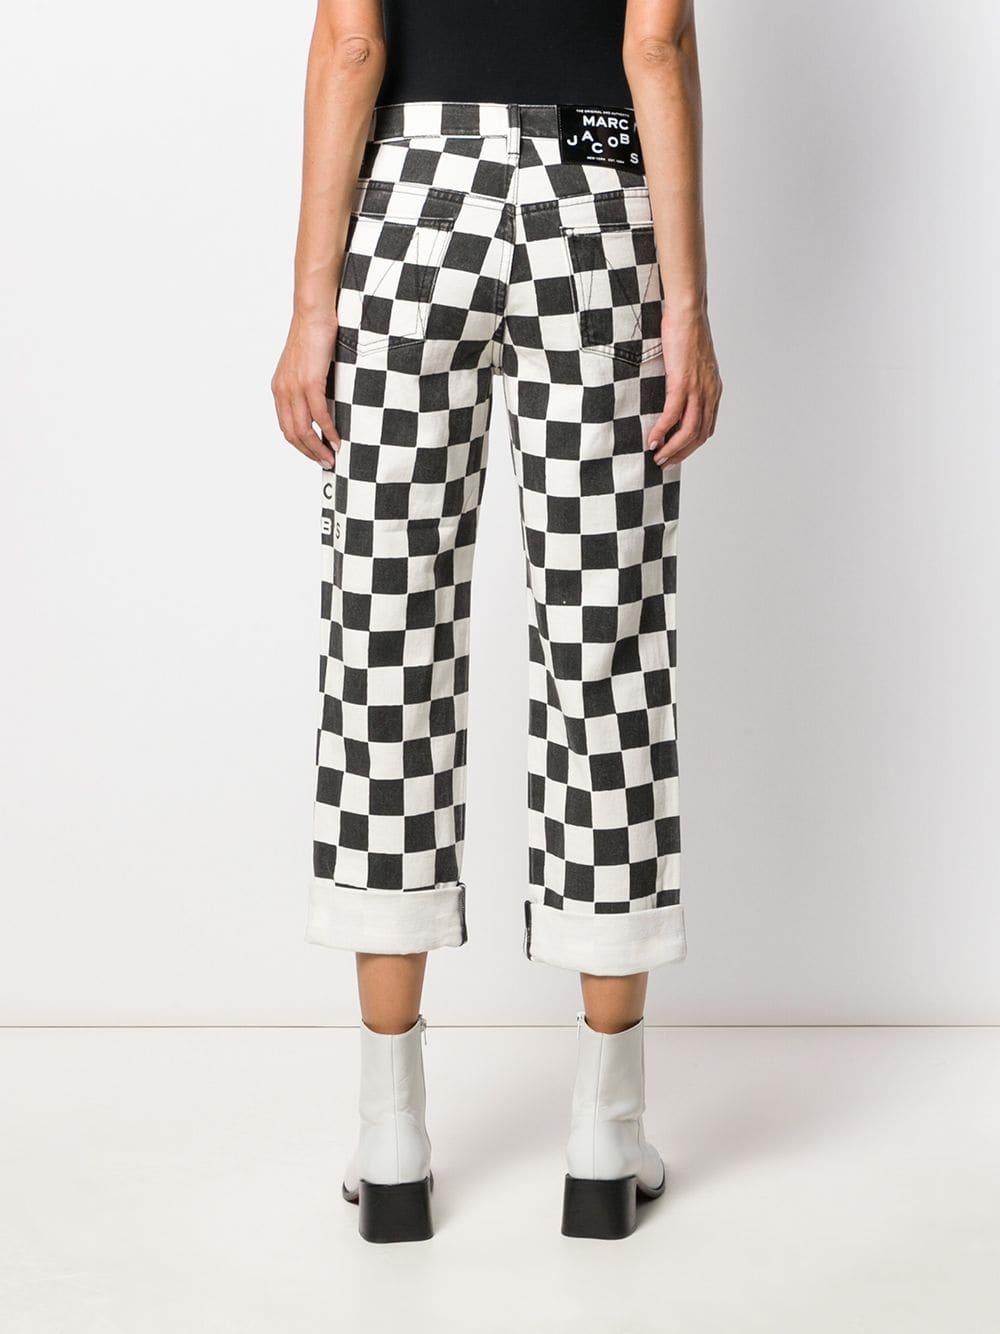 Marc Jacobs Checkered Straight-leg Jeans in Black | Lyst